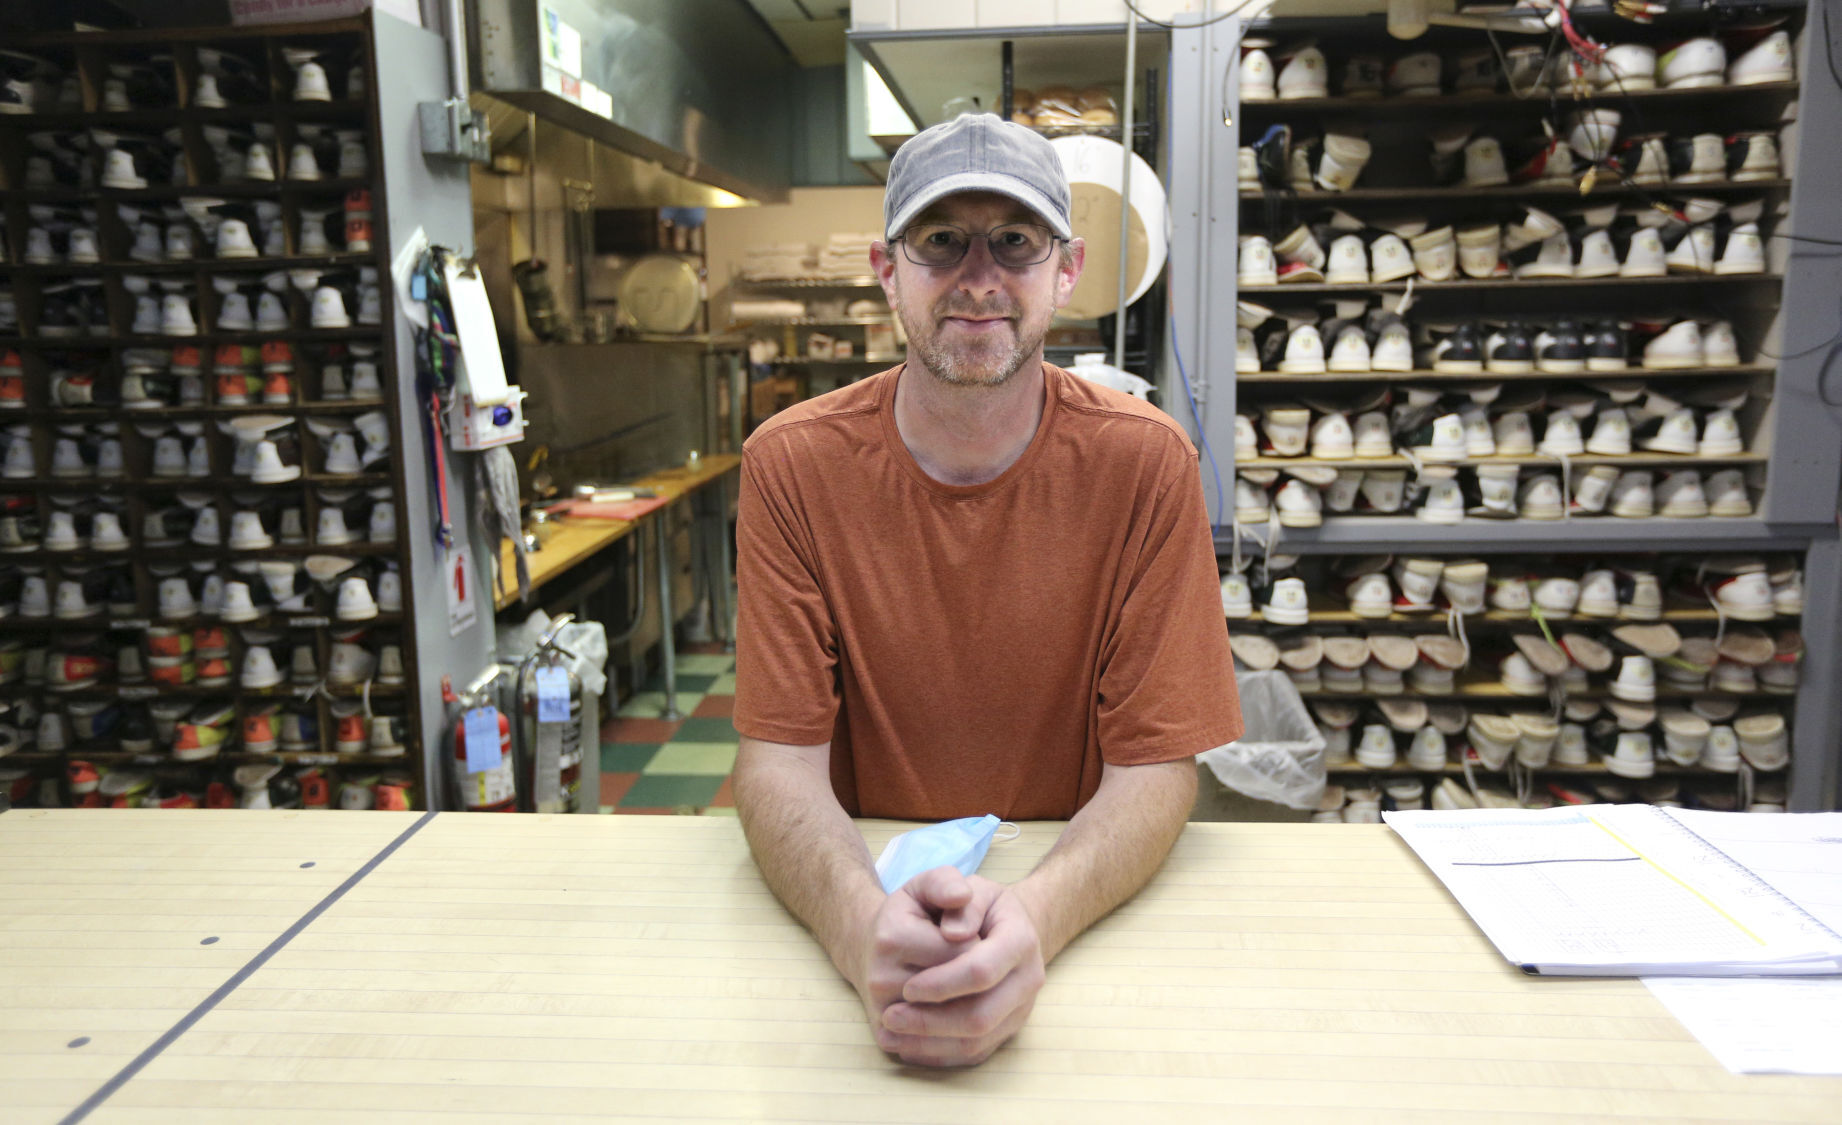 Joe Haack is the owner of Pioneer Lanes in Platteville, Wis., which has struggled financially during the pandemic. PHOTO CREDIT: Dave Kettering, Telegraph Herald